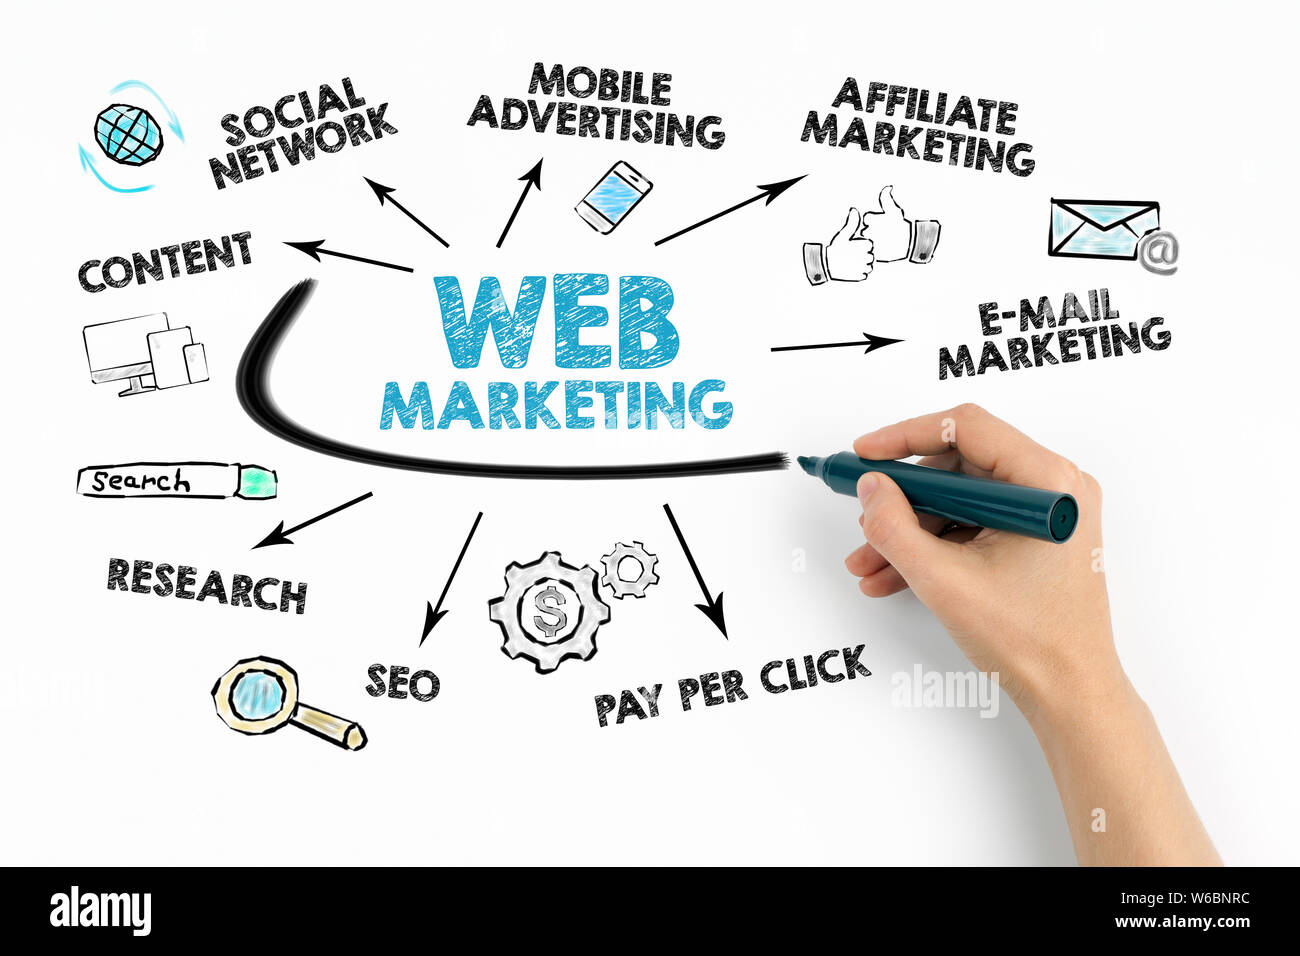 Web marketing concept. Chart with keywords and icons Stock Photo